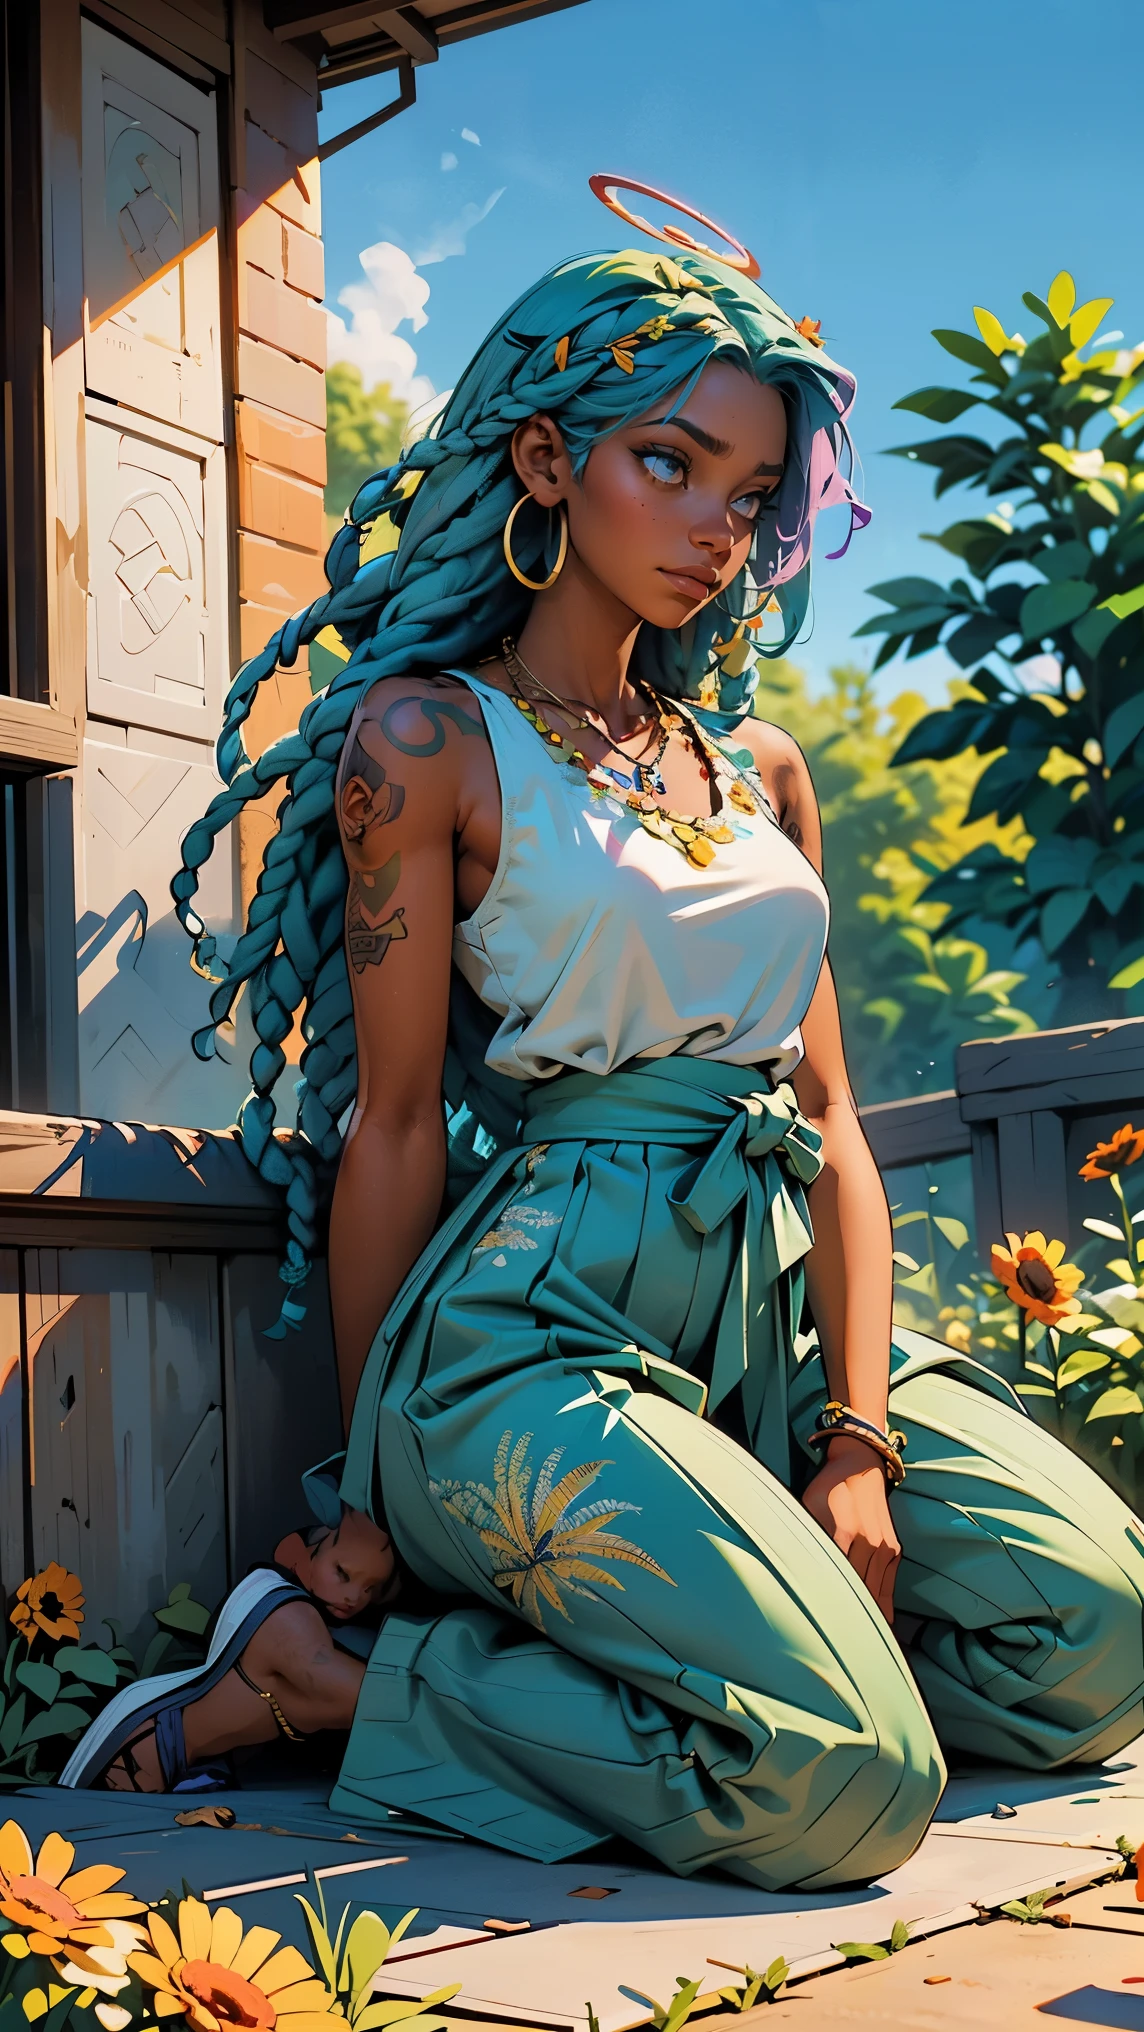 (Exterior: cannabis indica temple garden with sunflowers and tulips in bloom with overgrown cannabis indica shrubs), the scene depicting two lovers sharing a peaceful morning together,
((Figure 1: 1girl, dark-skinned Haitian woman, plump, violet hair, multicolored hair, hair between eyes, dreadlocks, messy hair, glowing halo, scar on cheek, cannabis leaf hair ornament, wearing flowing colorful sundress, sitting comfortably while rolling herbal joint peacefully)) next to ((Figure 2: 1boy, tan Caribbean man, athletic build, flowing braided blue hair, two-tone color hair, prayer bead necklace, wearing tight dark tank top, wearing colorful detailed ornate hakama with sigil designs, tattooed arms and body, kneeling next to girl in peaceful prayer))